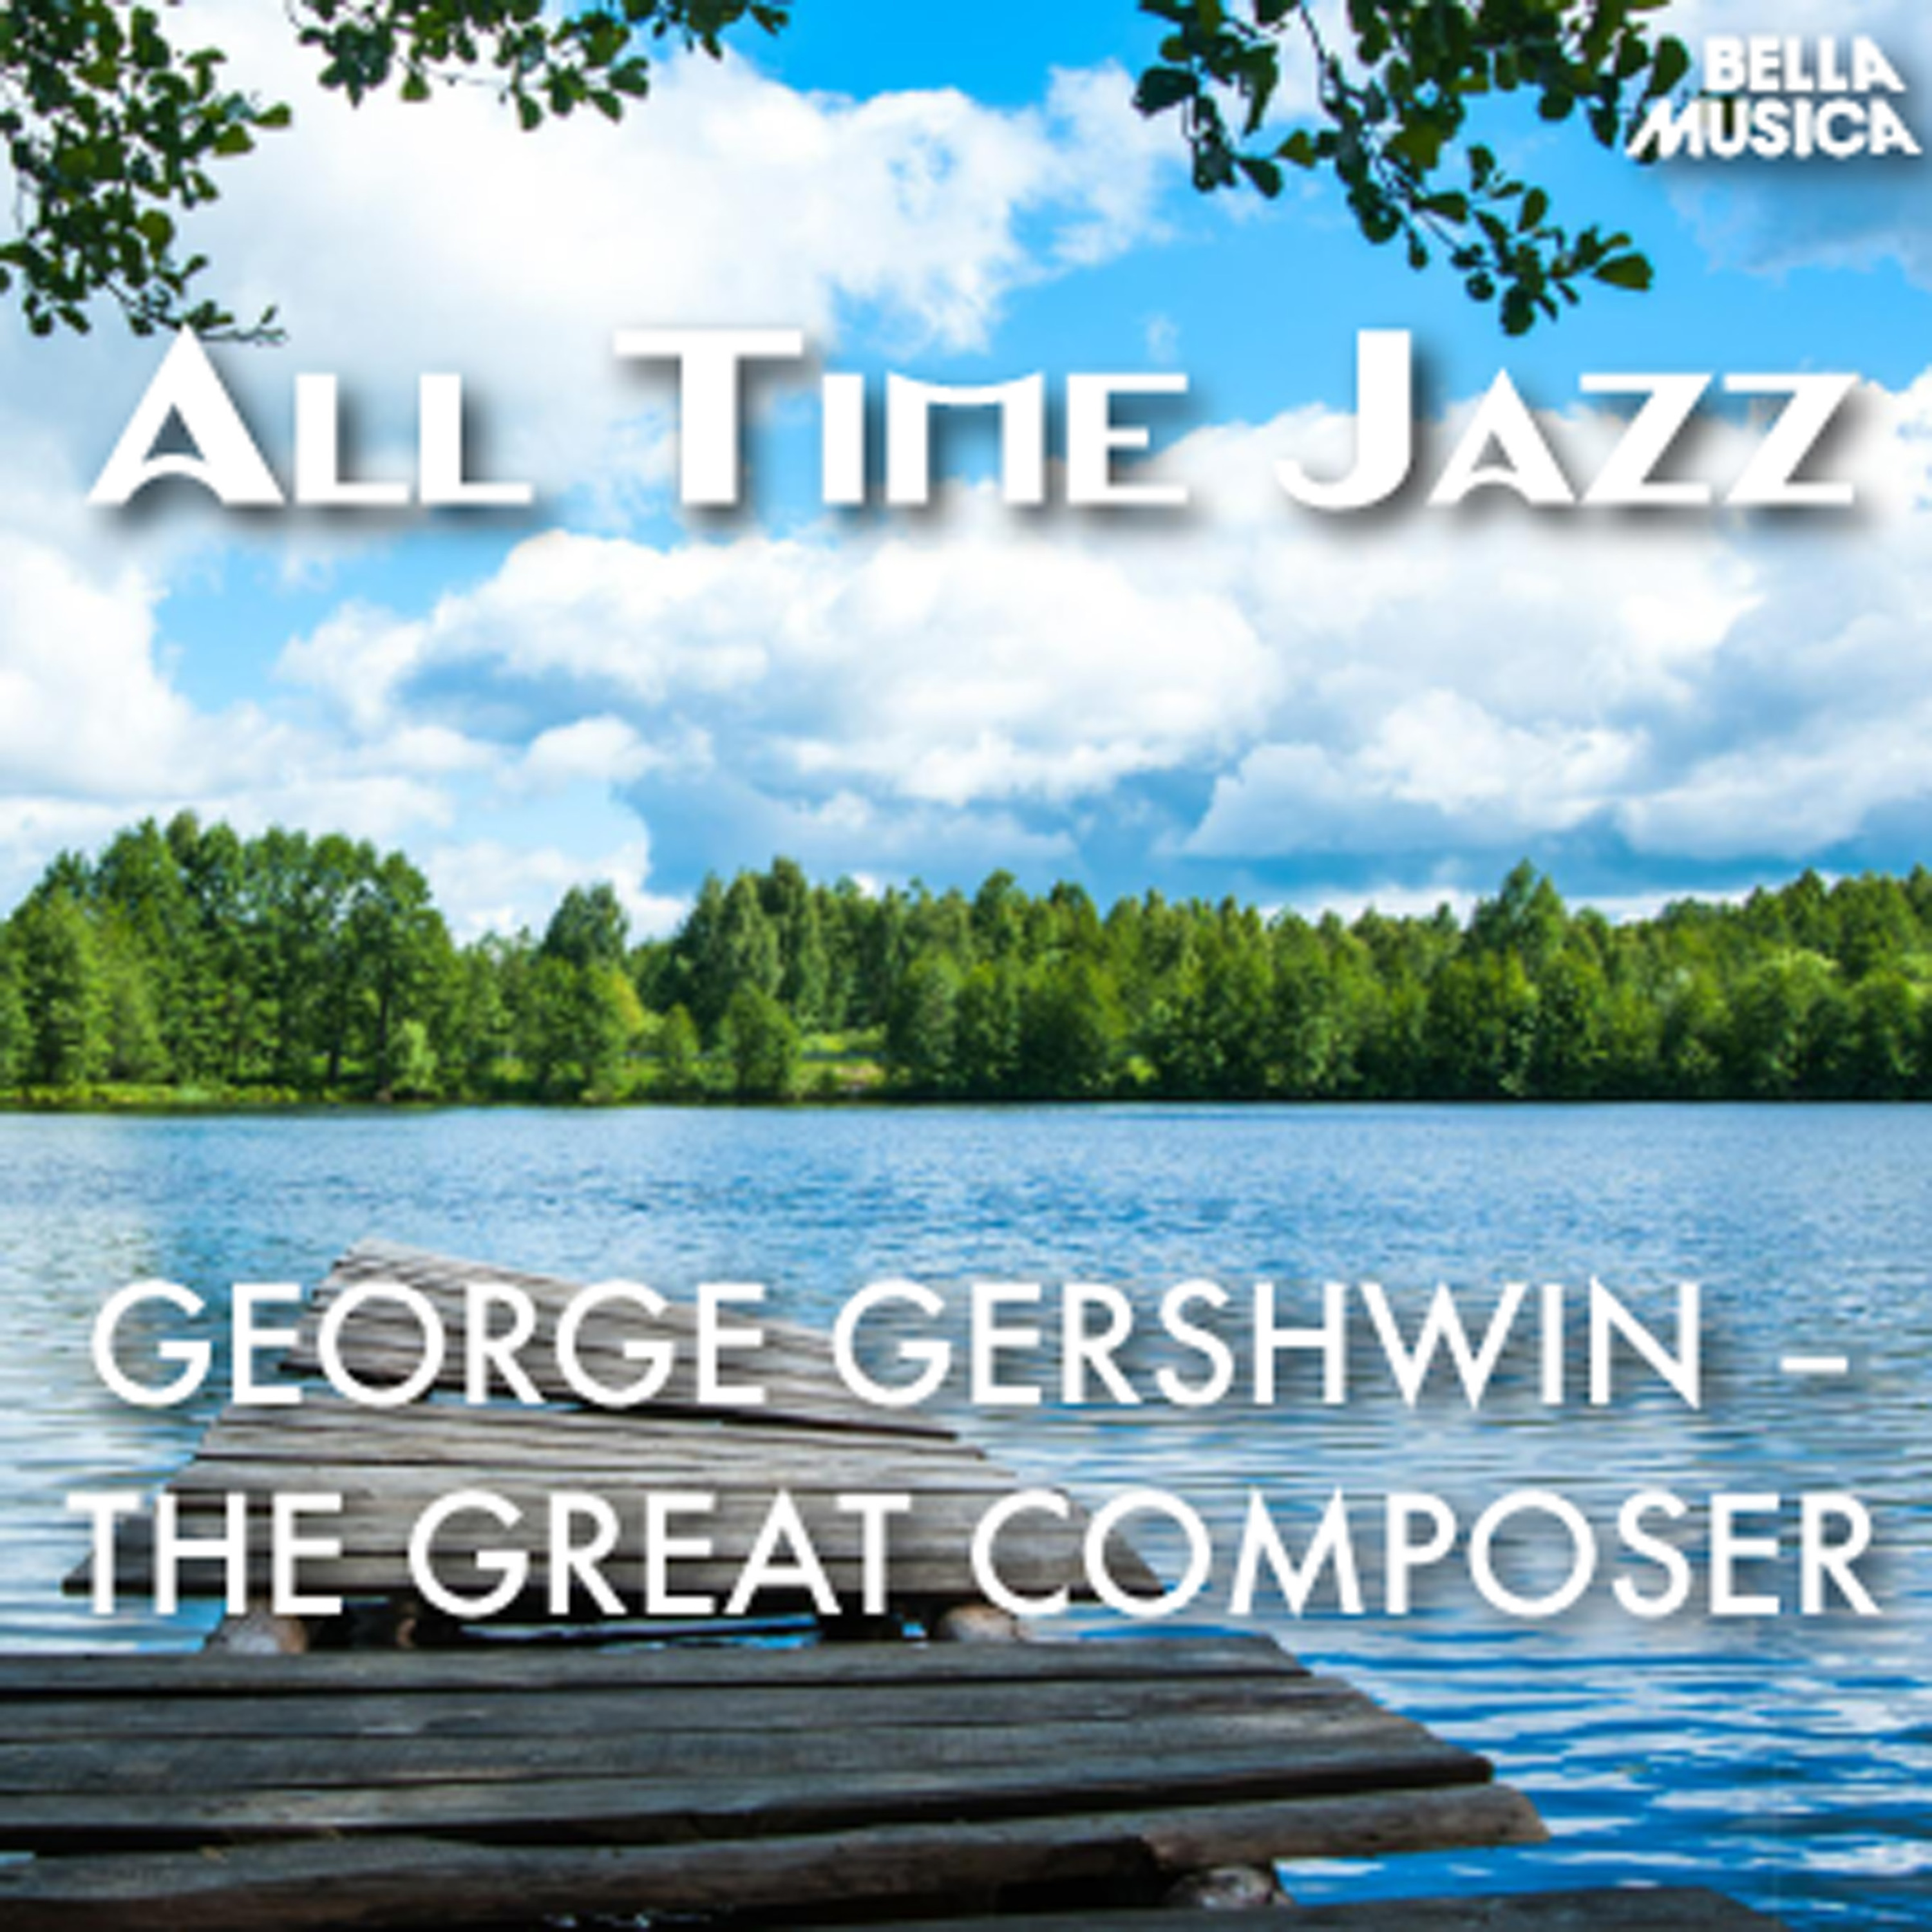 All Time Jazz: George Gershwin - The Great Composer